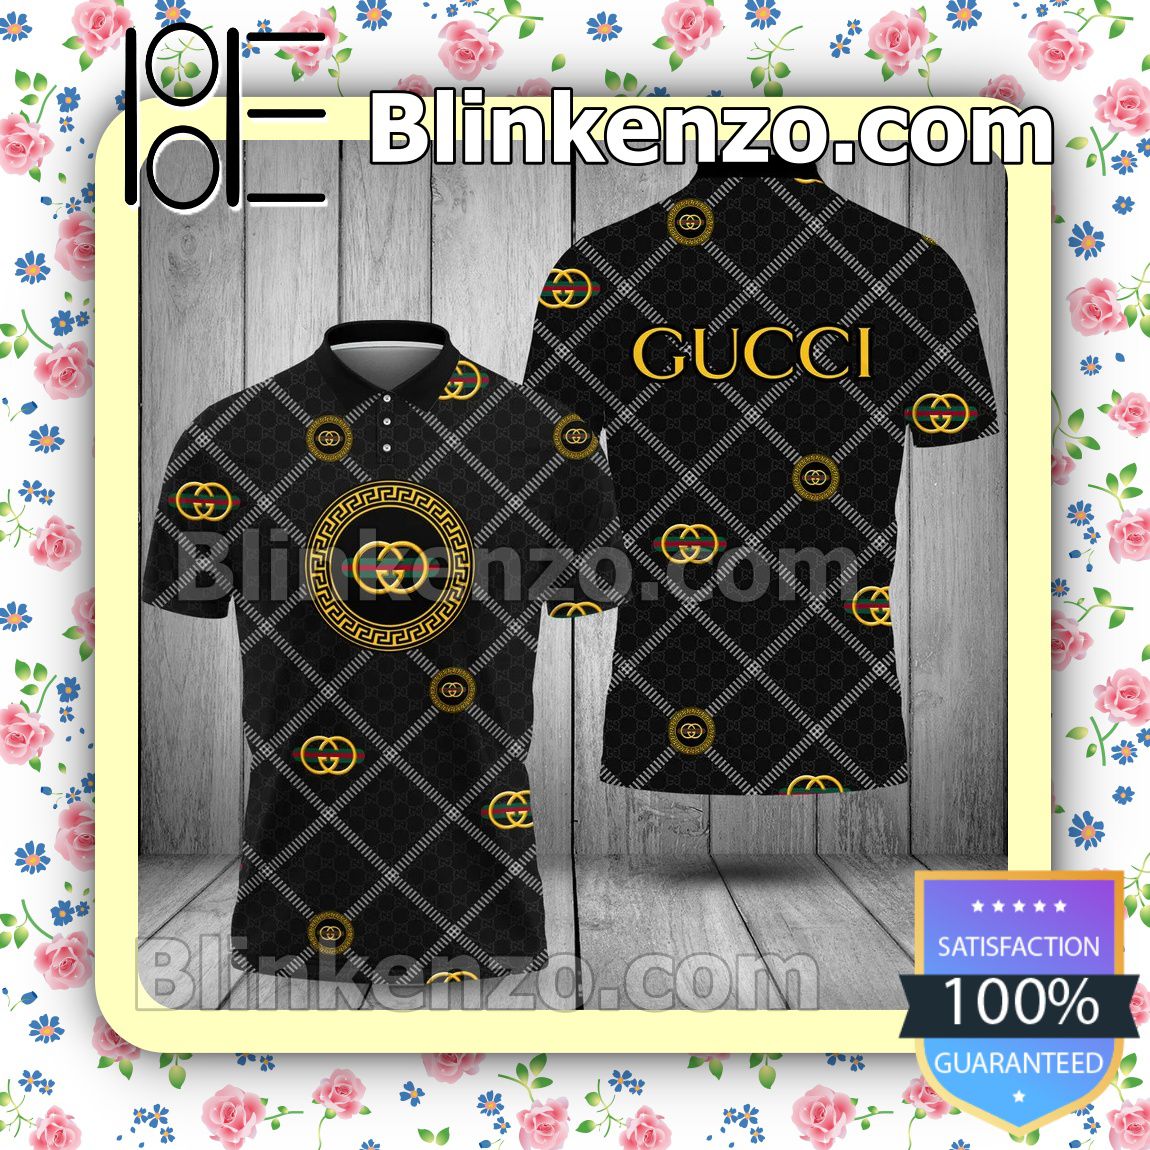 Gucci Black Squares Embroidered Polo Shirts